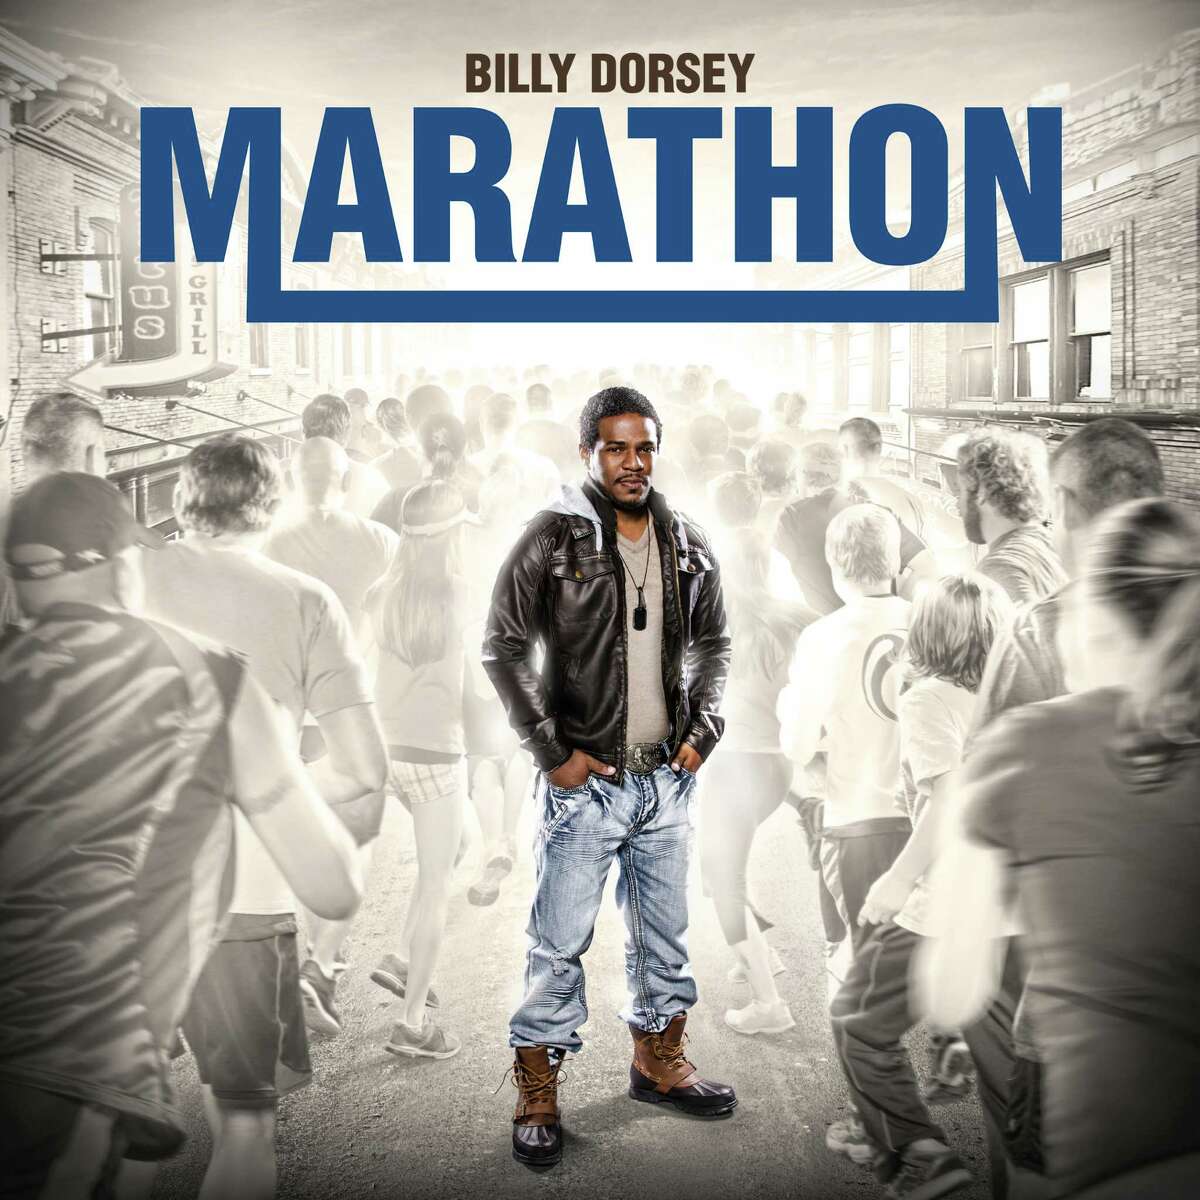 Gospel music artist Billy Dorsey hopes his new album, "Marathon," pushes the genre in a new direction.